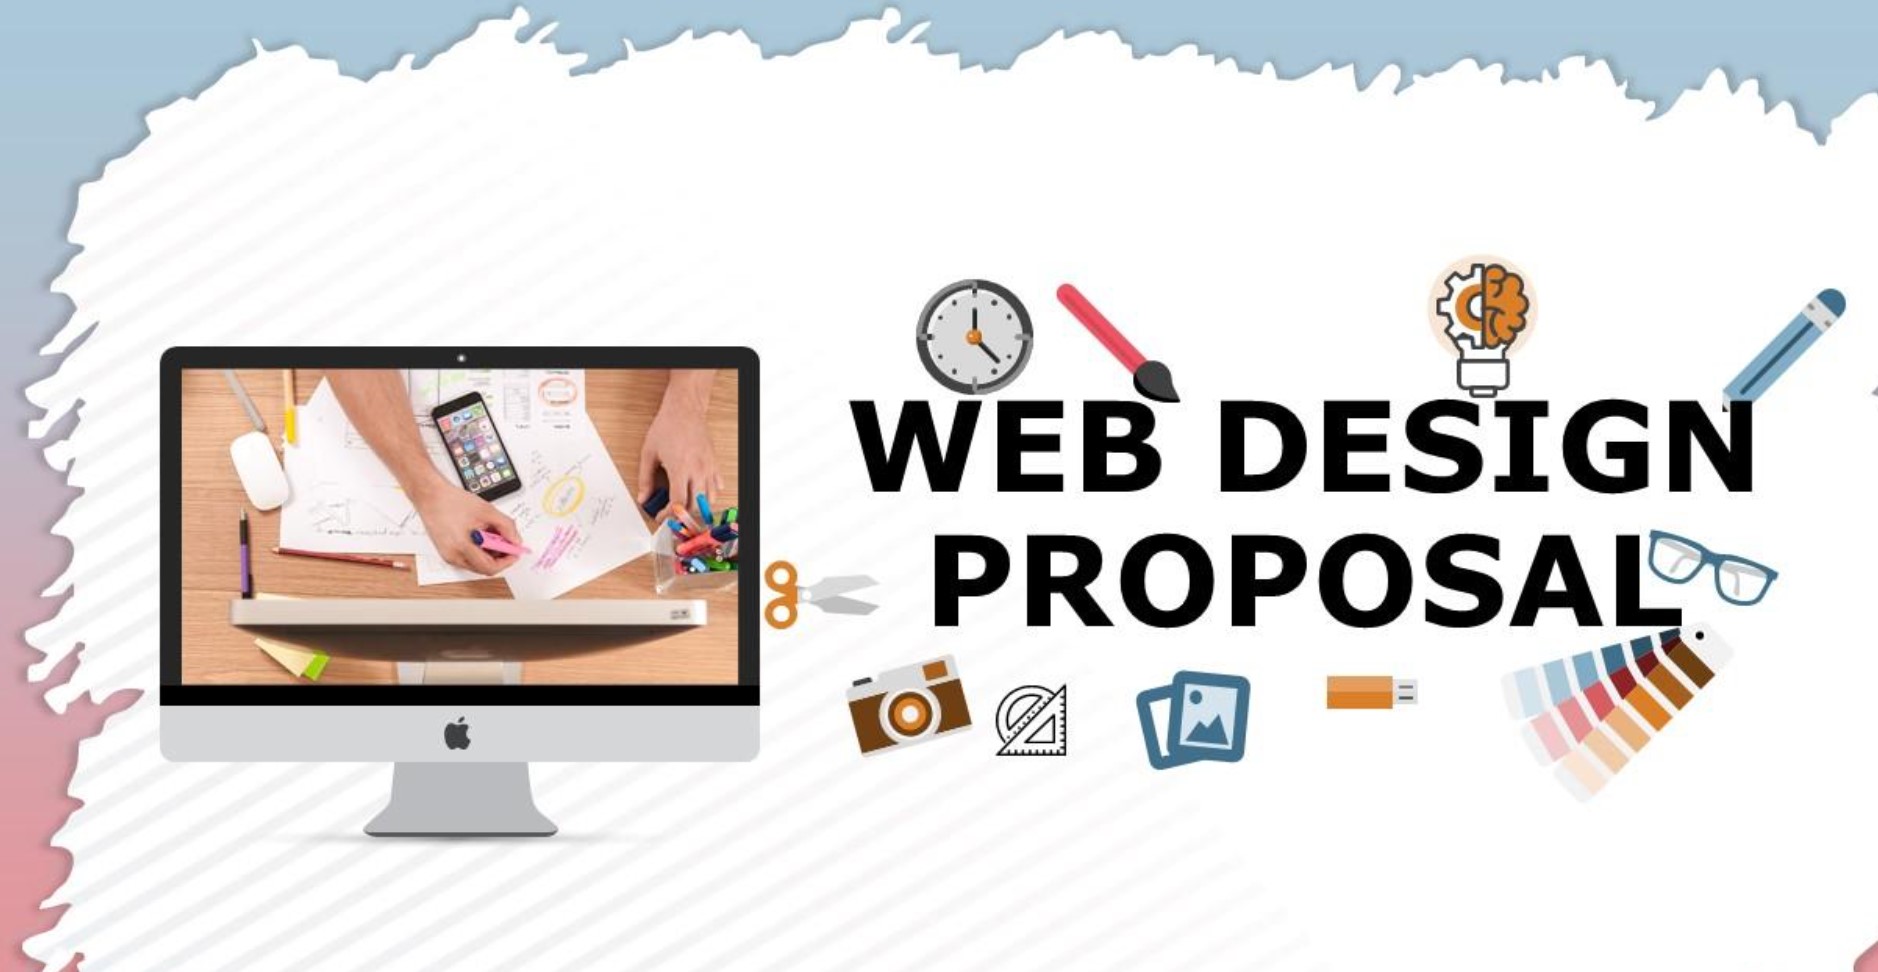 Essential Elements of a Professional Web Design Proposal